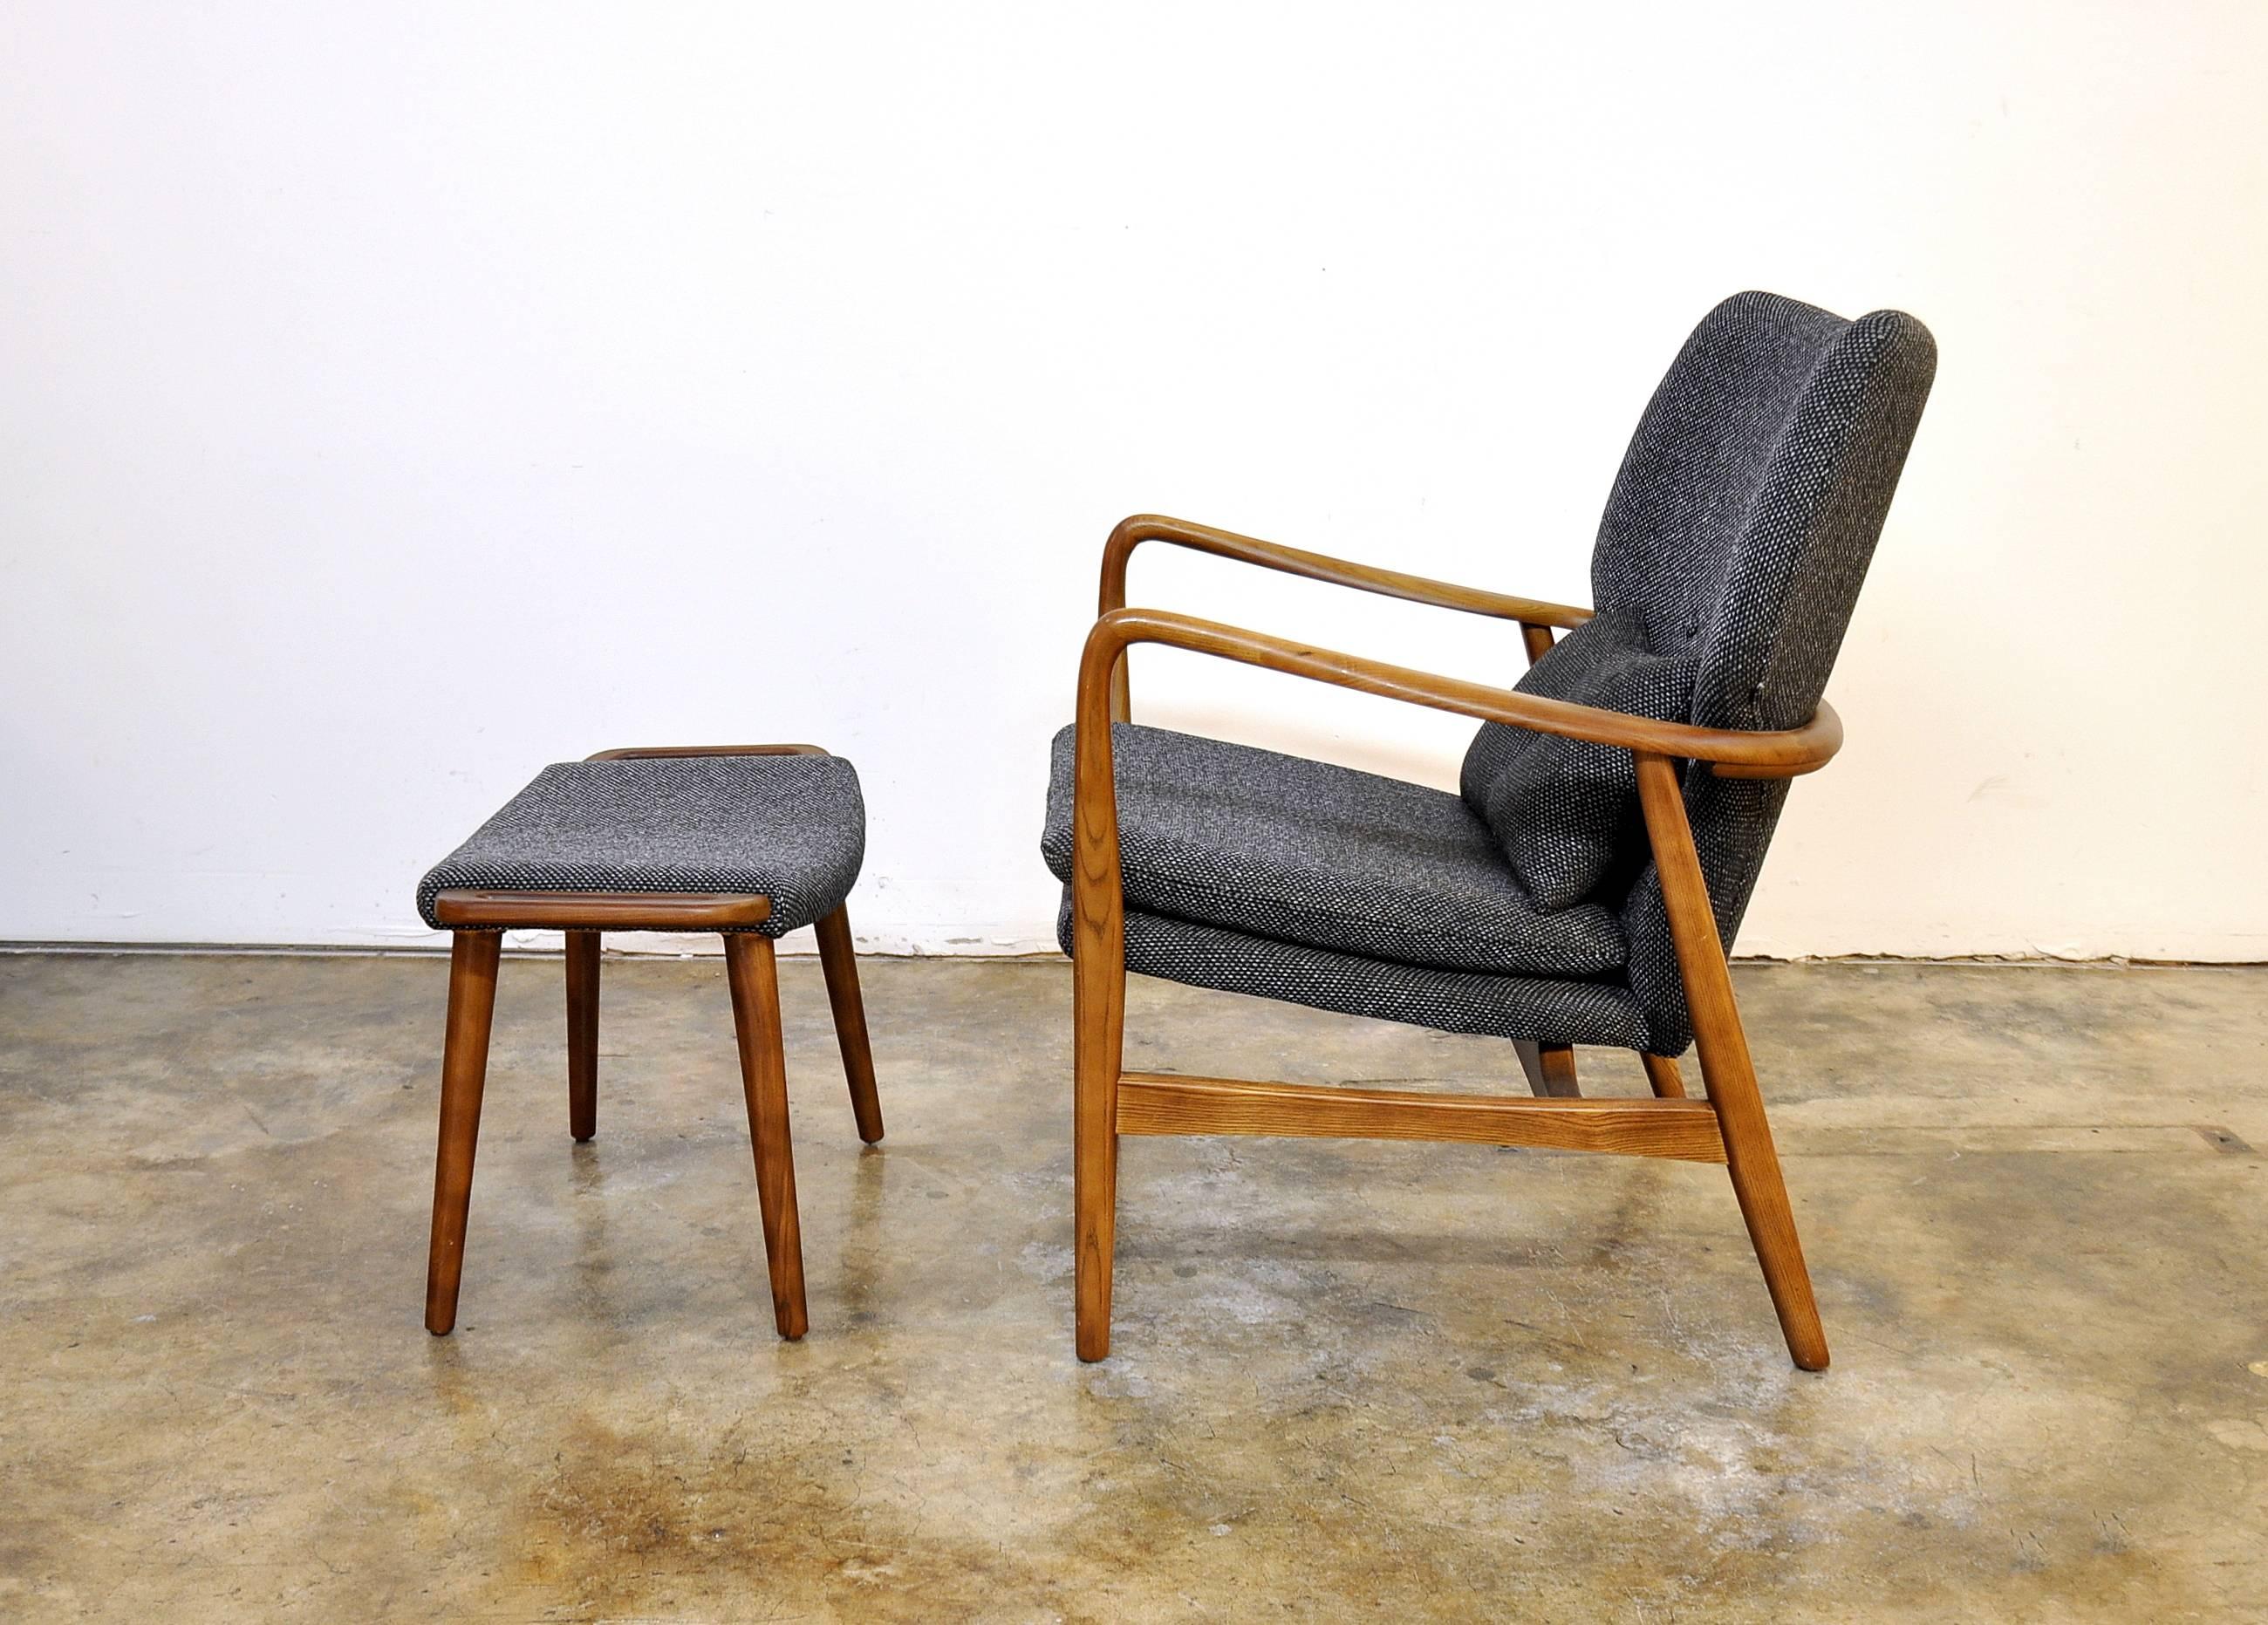 This rare mid-century Danish Modern stained beech easy chair features an outstanding design where the floating wingback and seat are encircled by and suspended within the round wood frame that continues seamlessly into shaped armrests and finishes